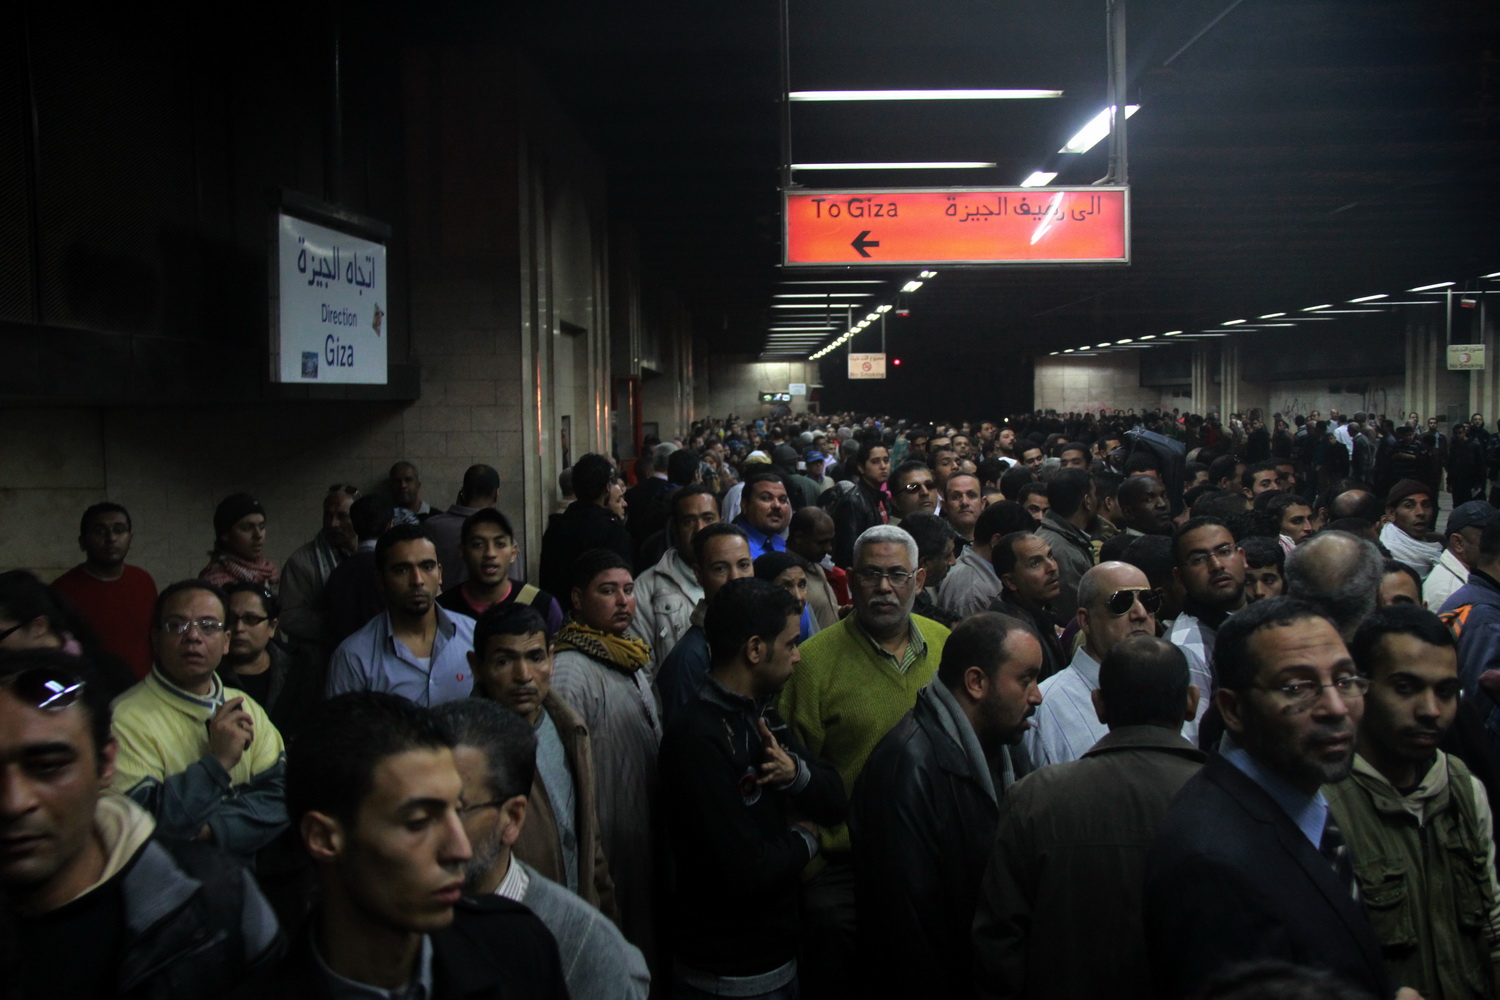 People wai for the metro at Saad Zaglhoul station that was earlier blocked by Ultras groups . By: Ahmed Al-Malky